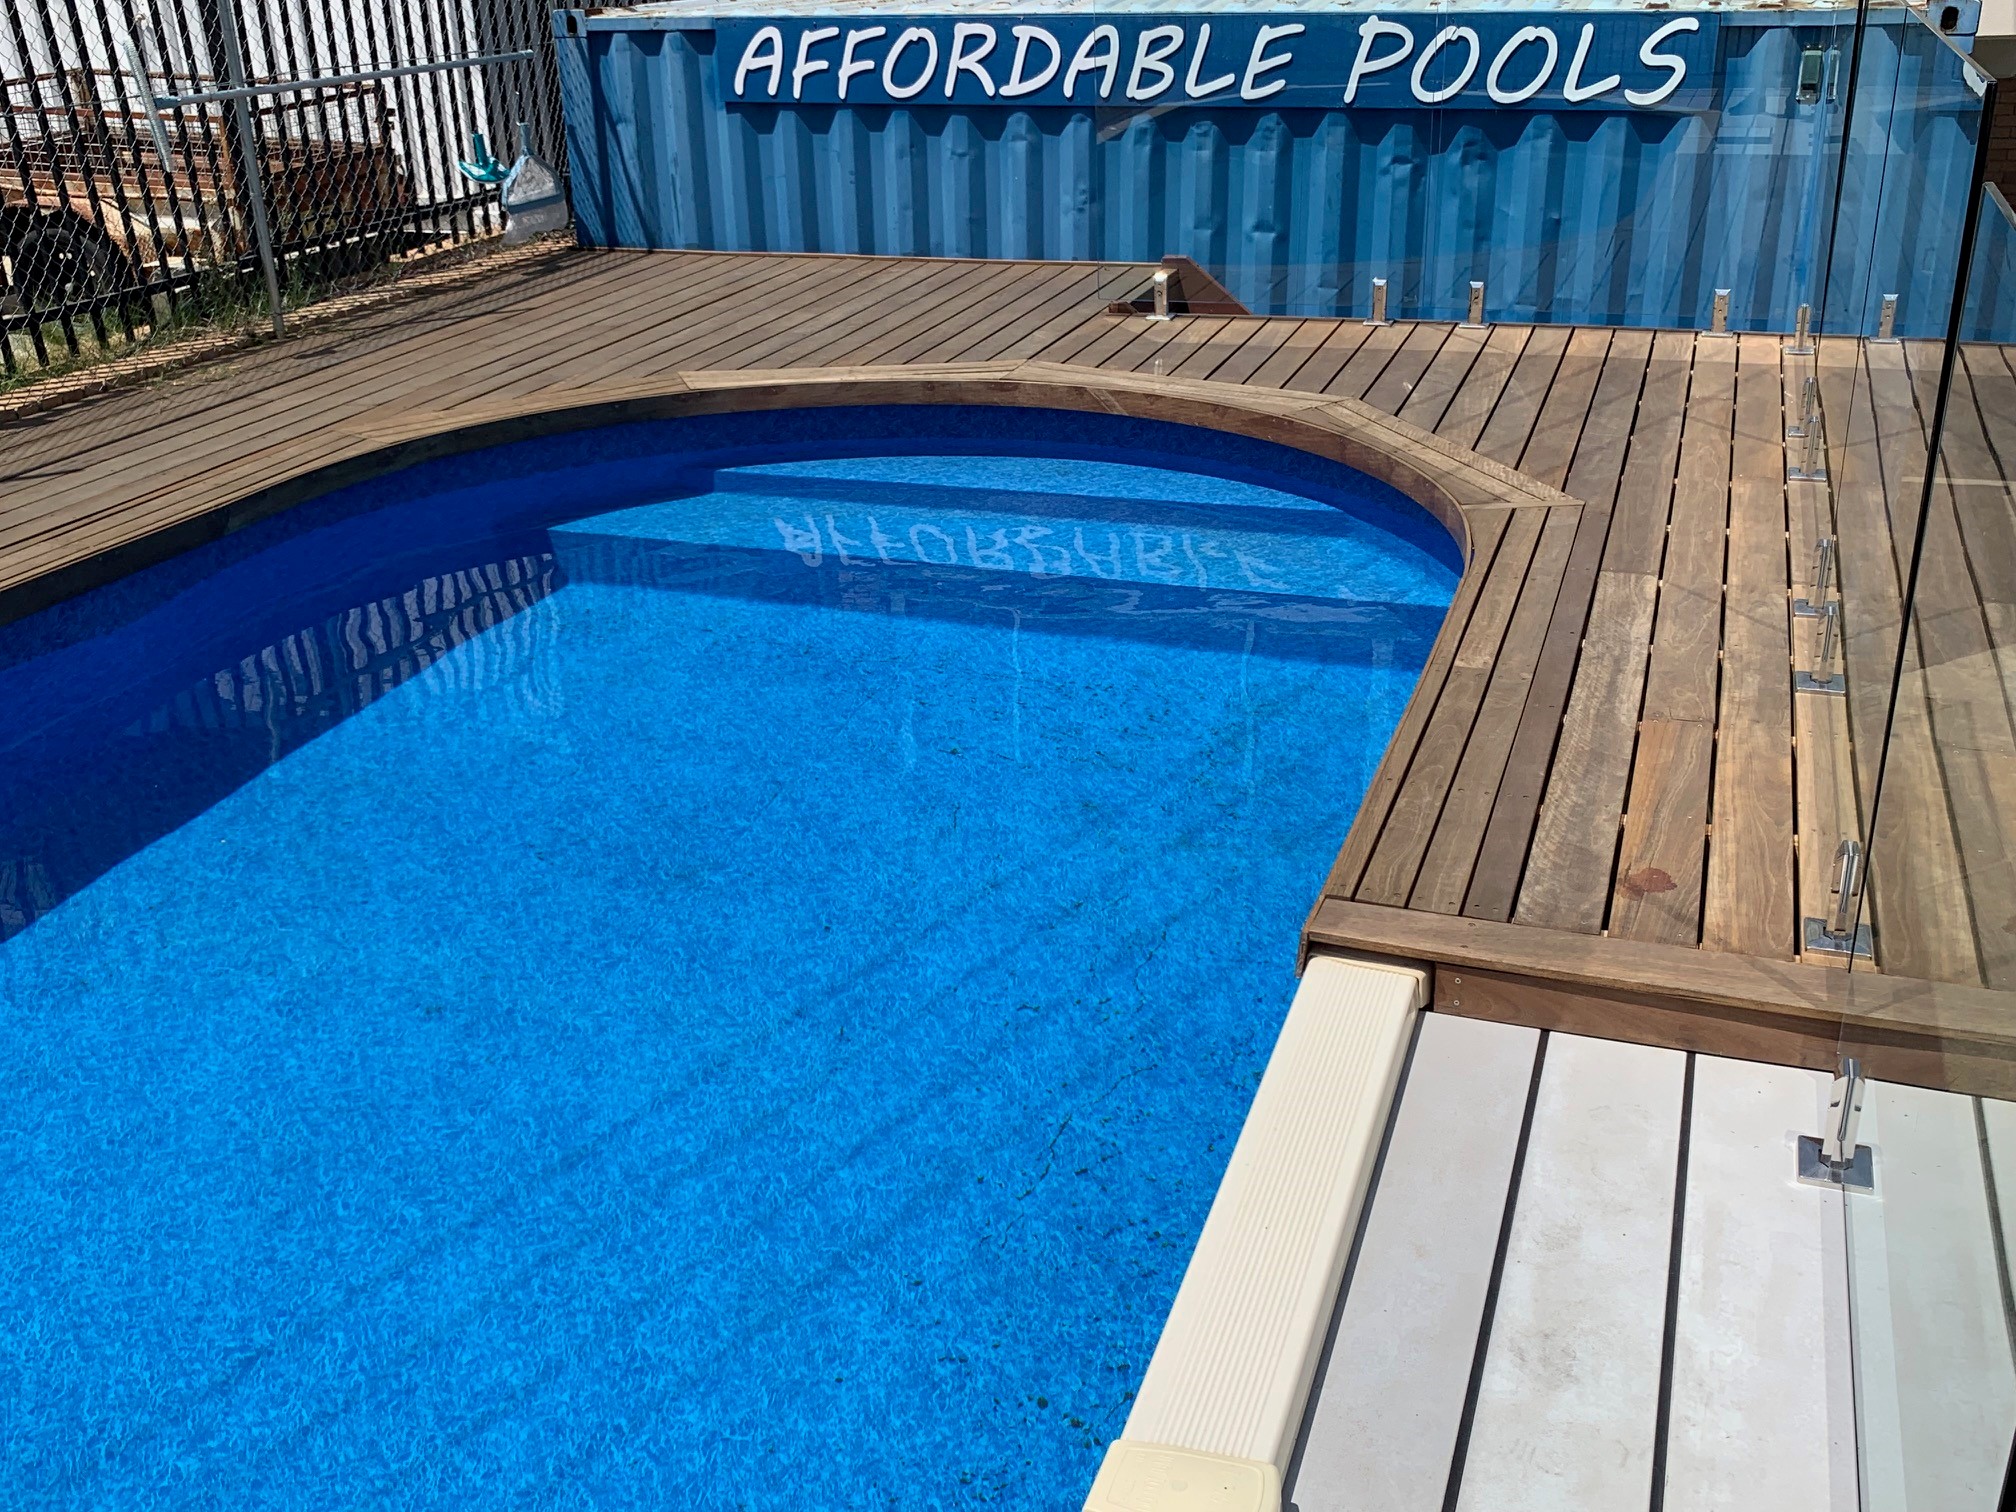 Step and Deck Affordable Pools